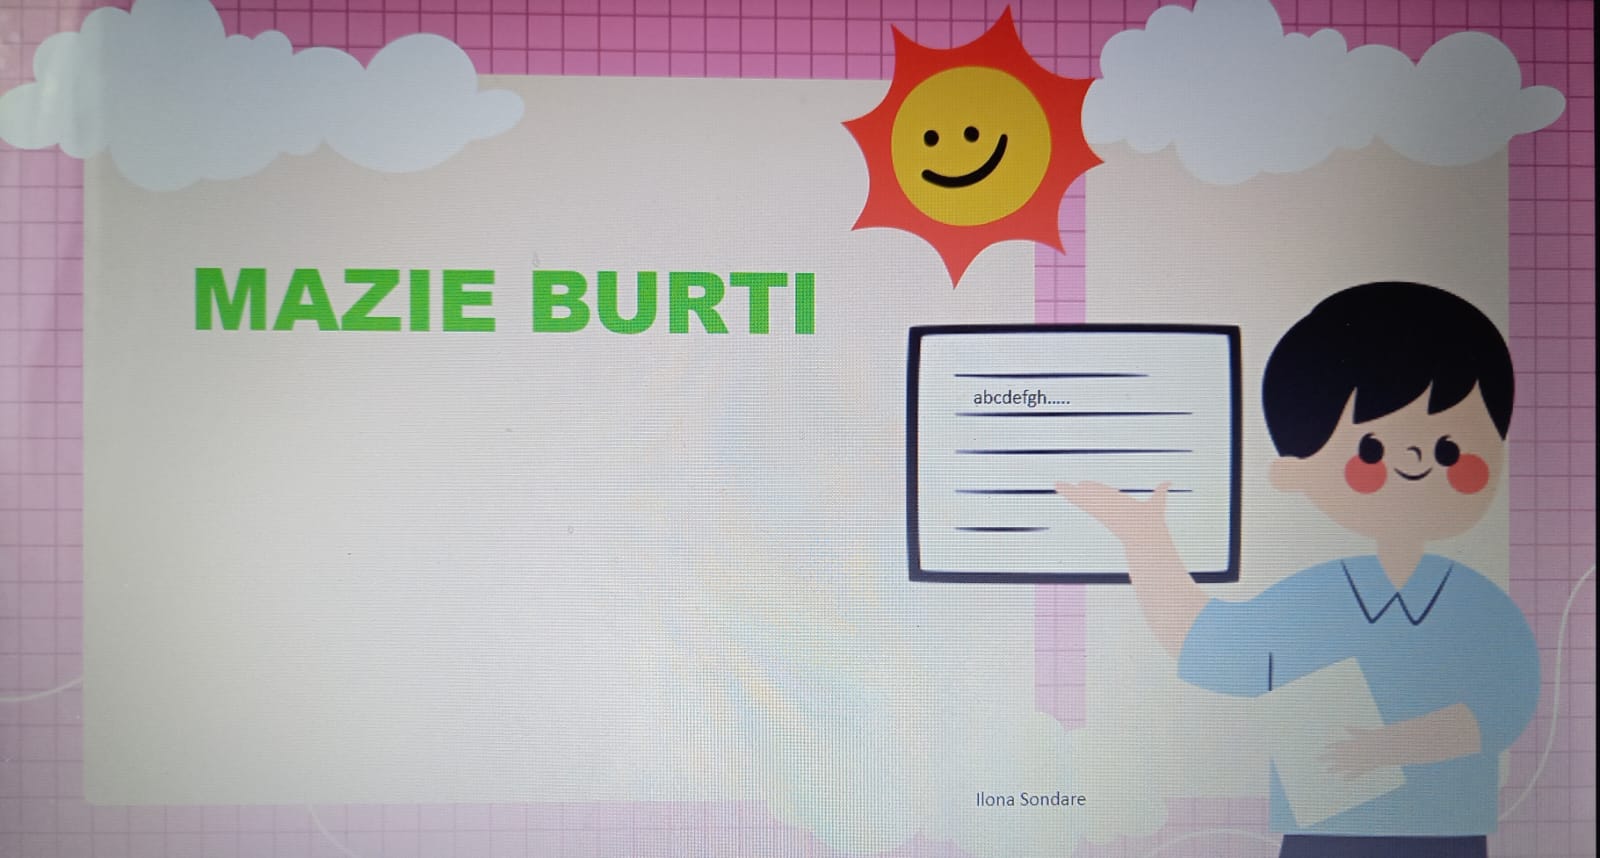 You are currently viewing Mazie burti